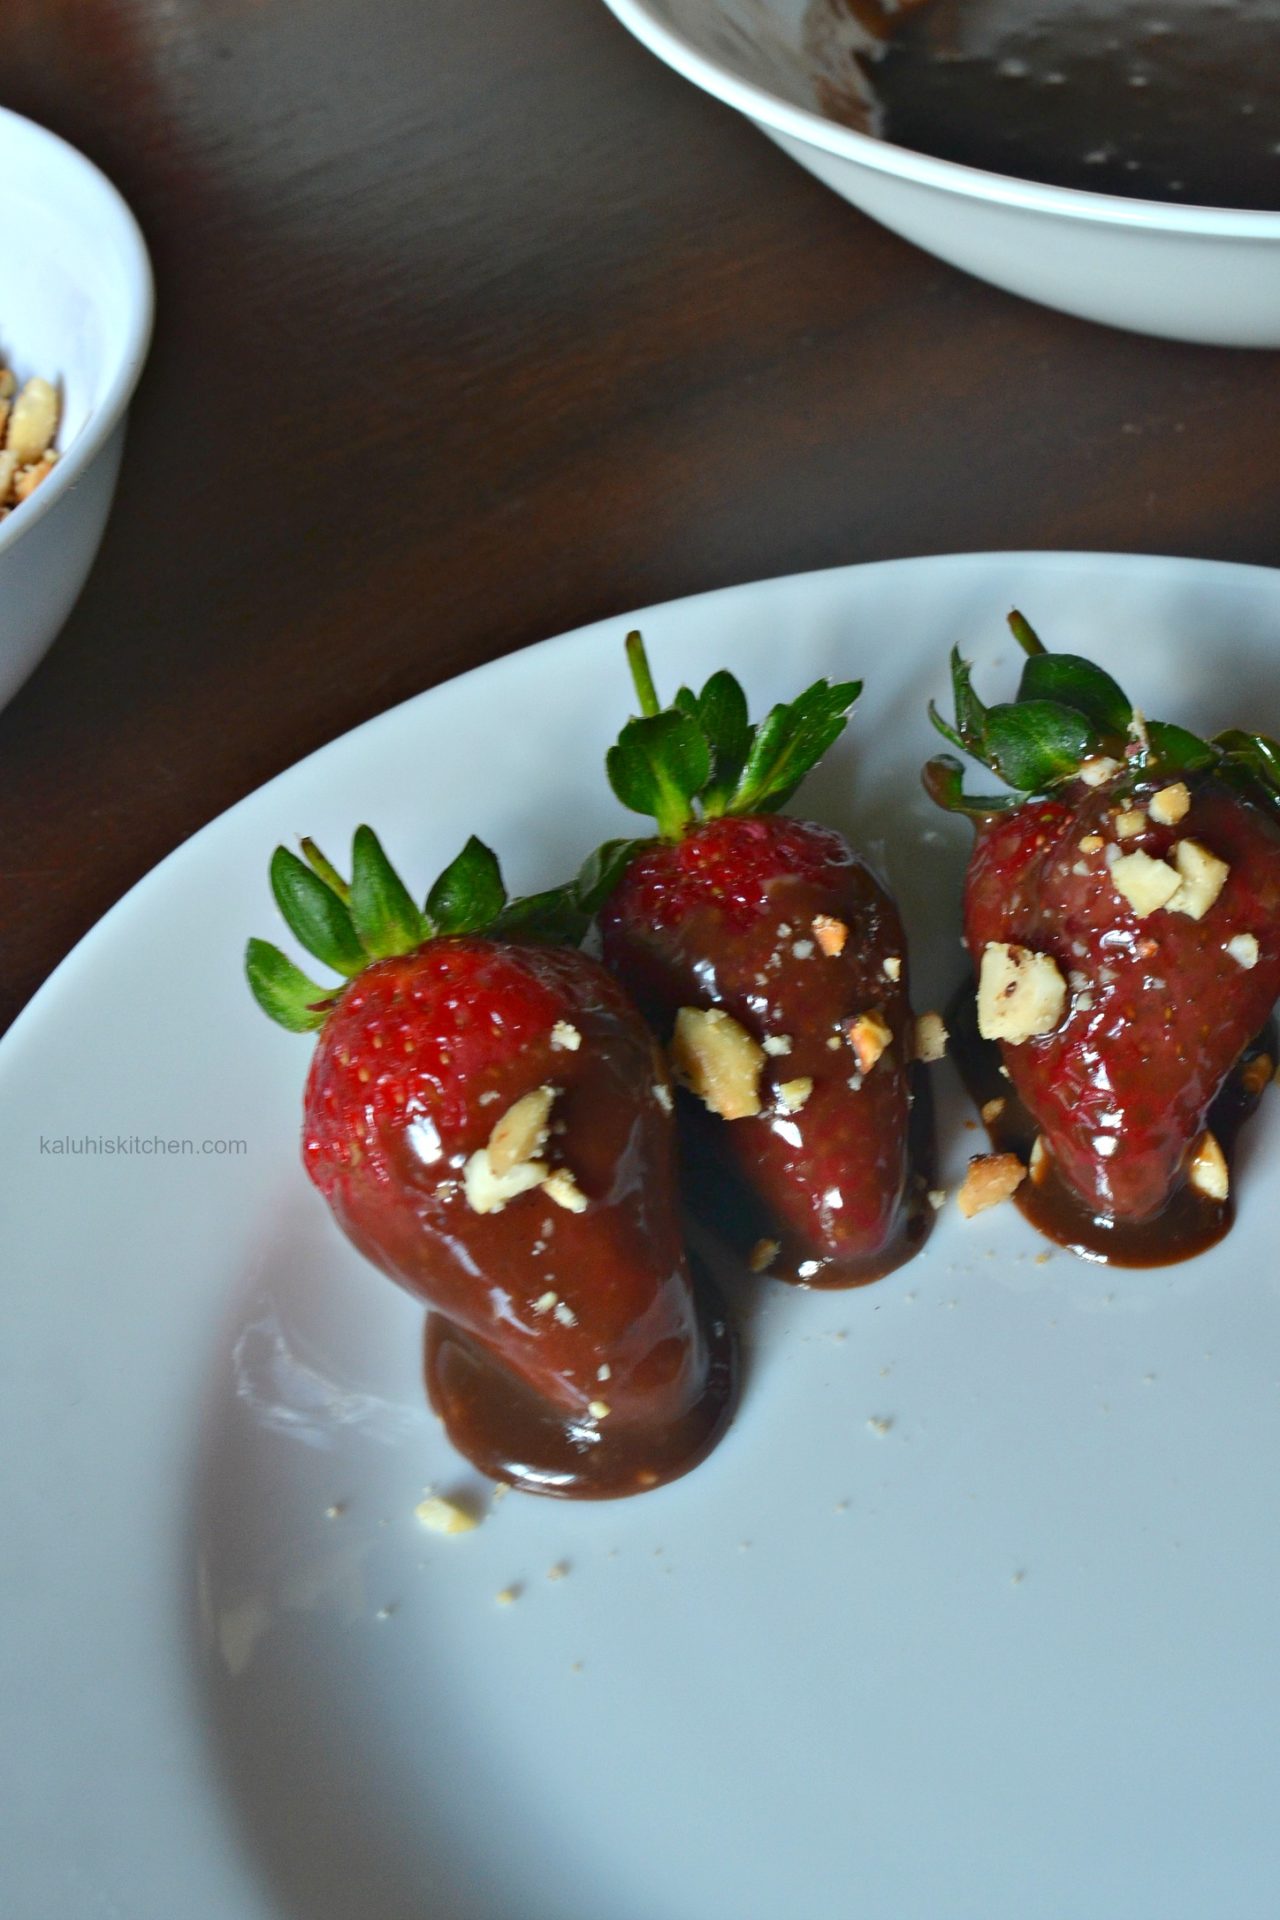 dip the strawberries in the chocolate and allow them to refridgerate for about 30 minutes_kaluhiskitchen.com